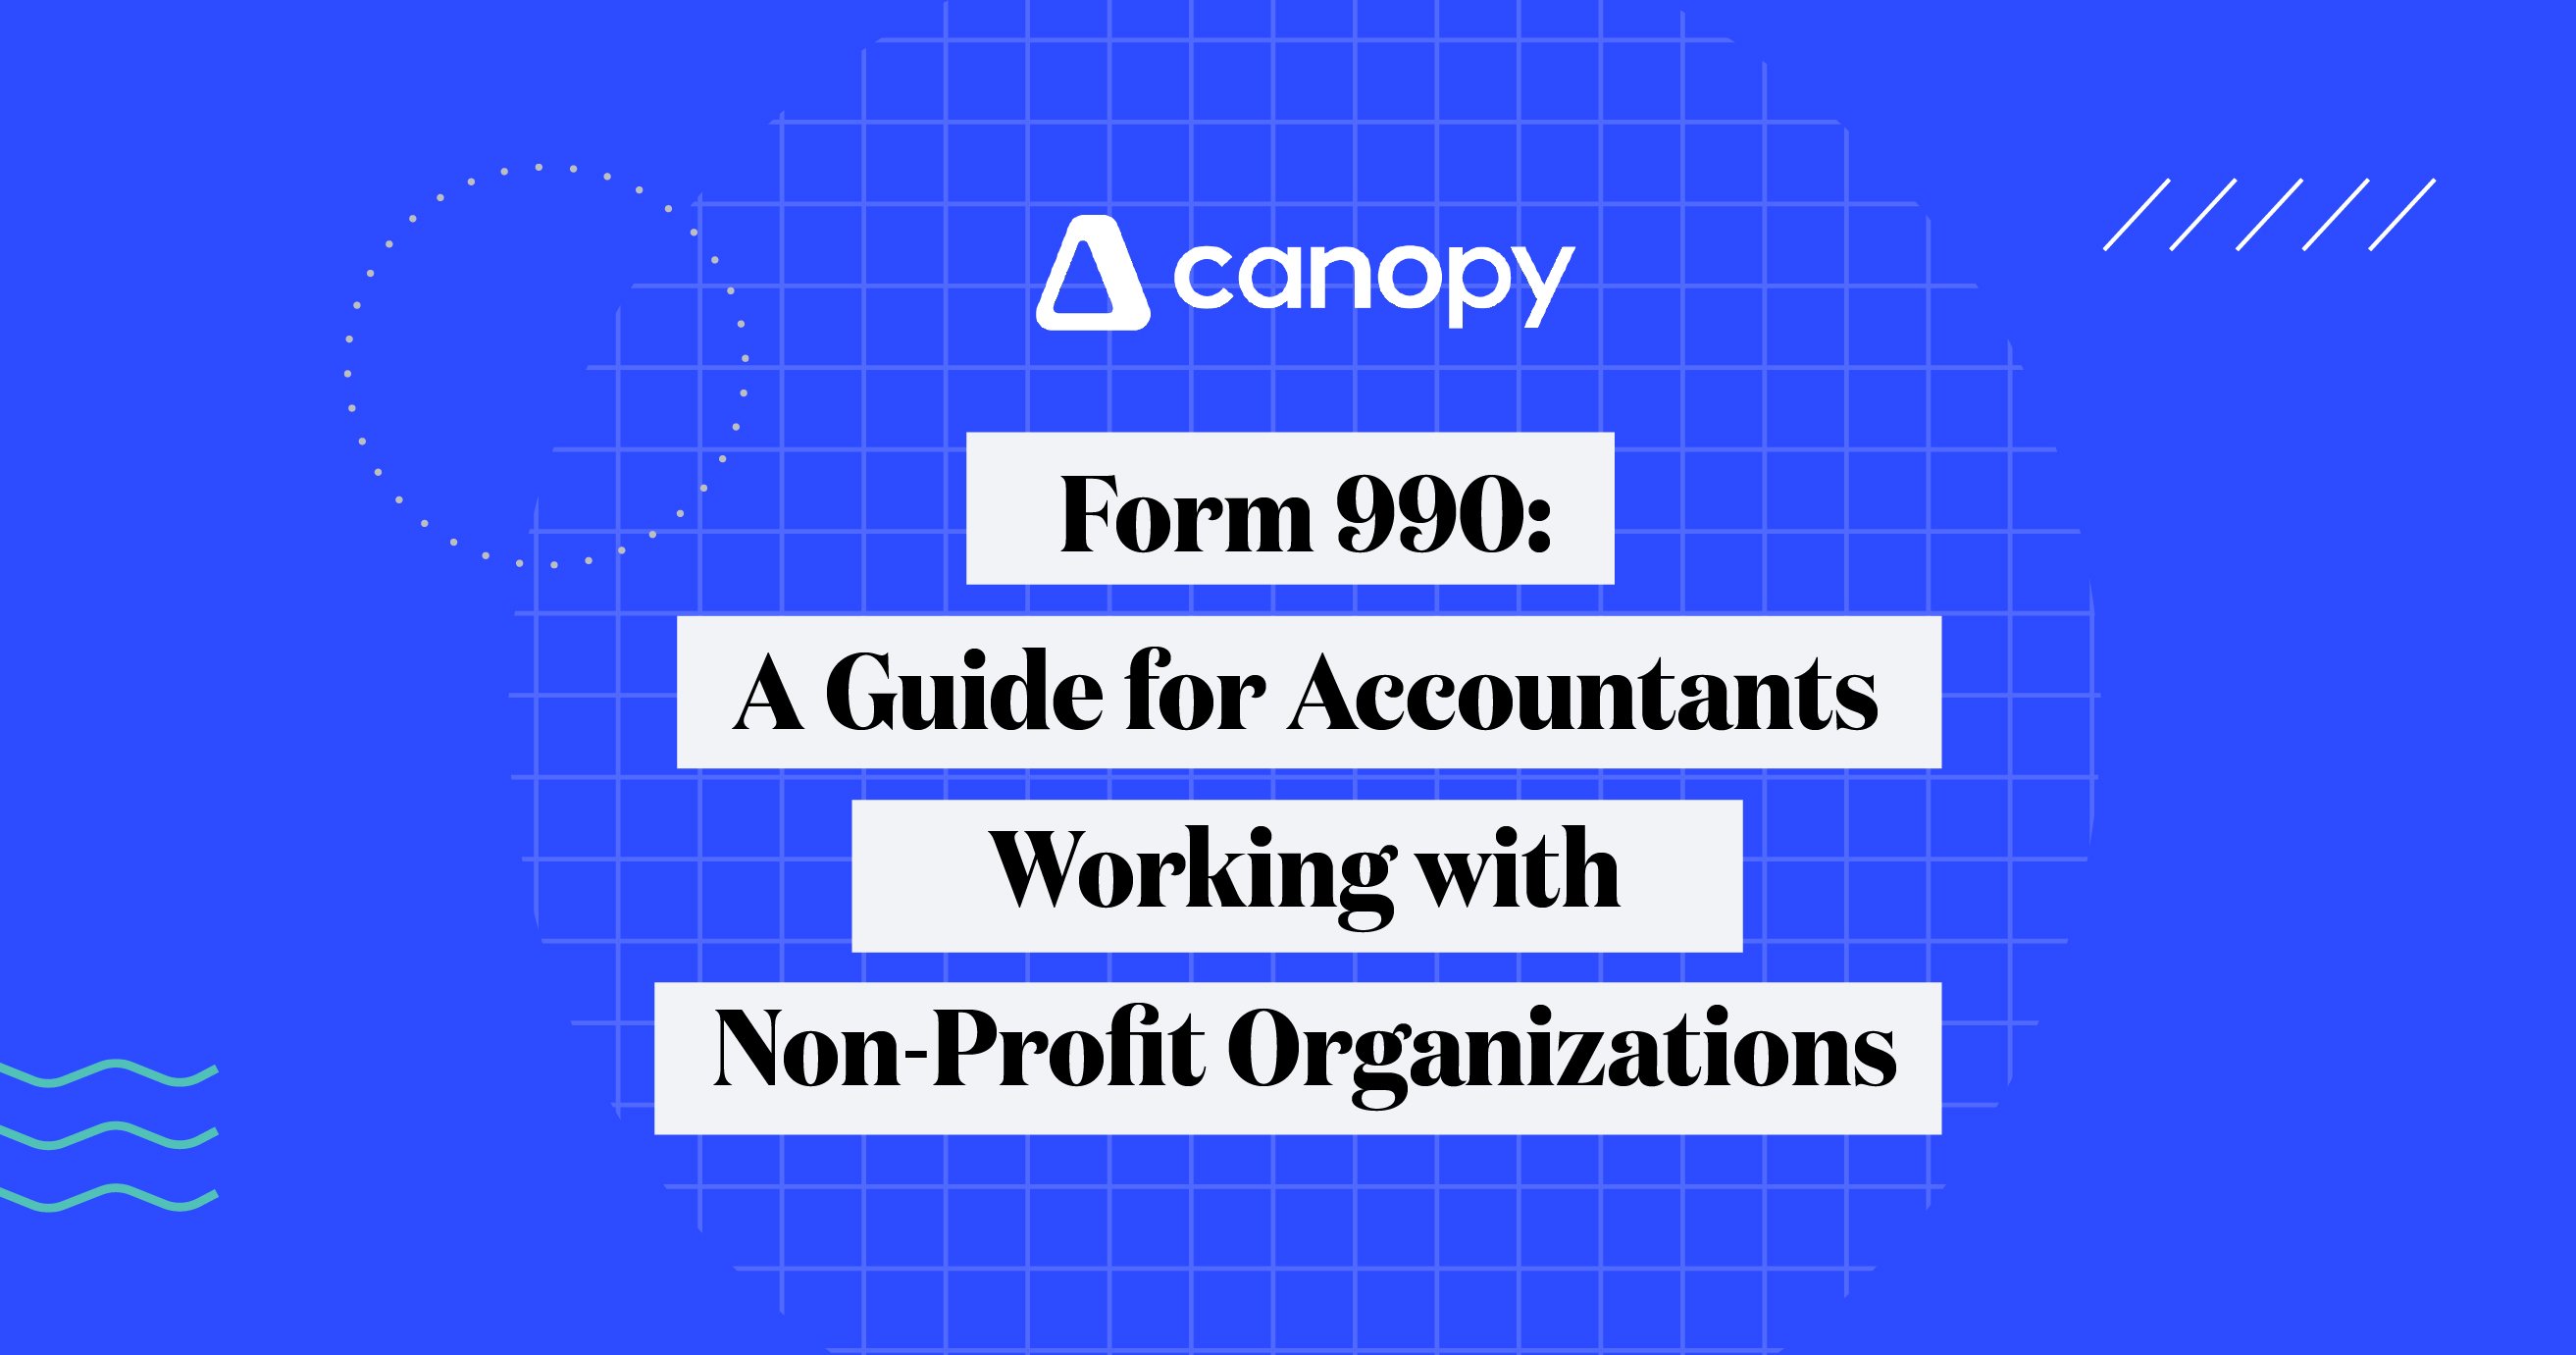 Form 990: A Guide for Accountants Working with Non-Profit Organizations